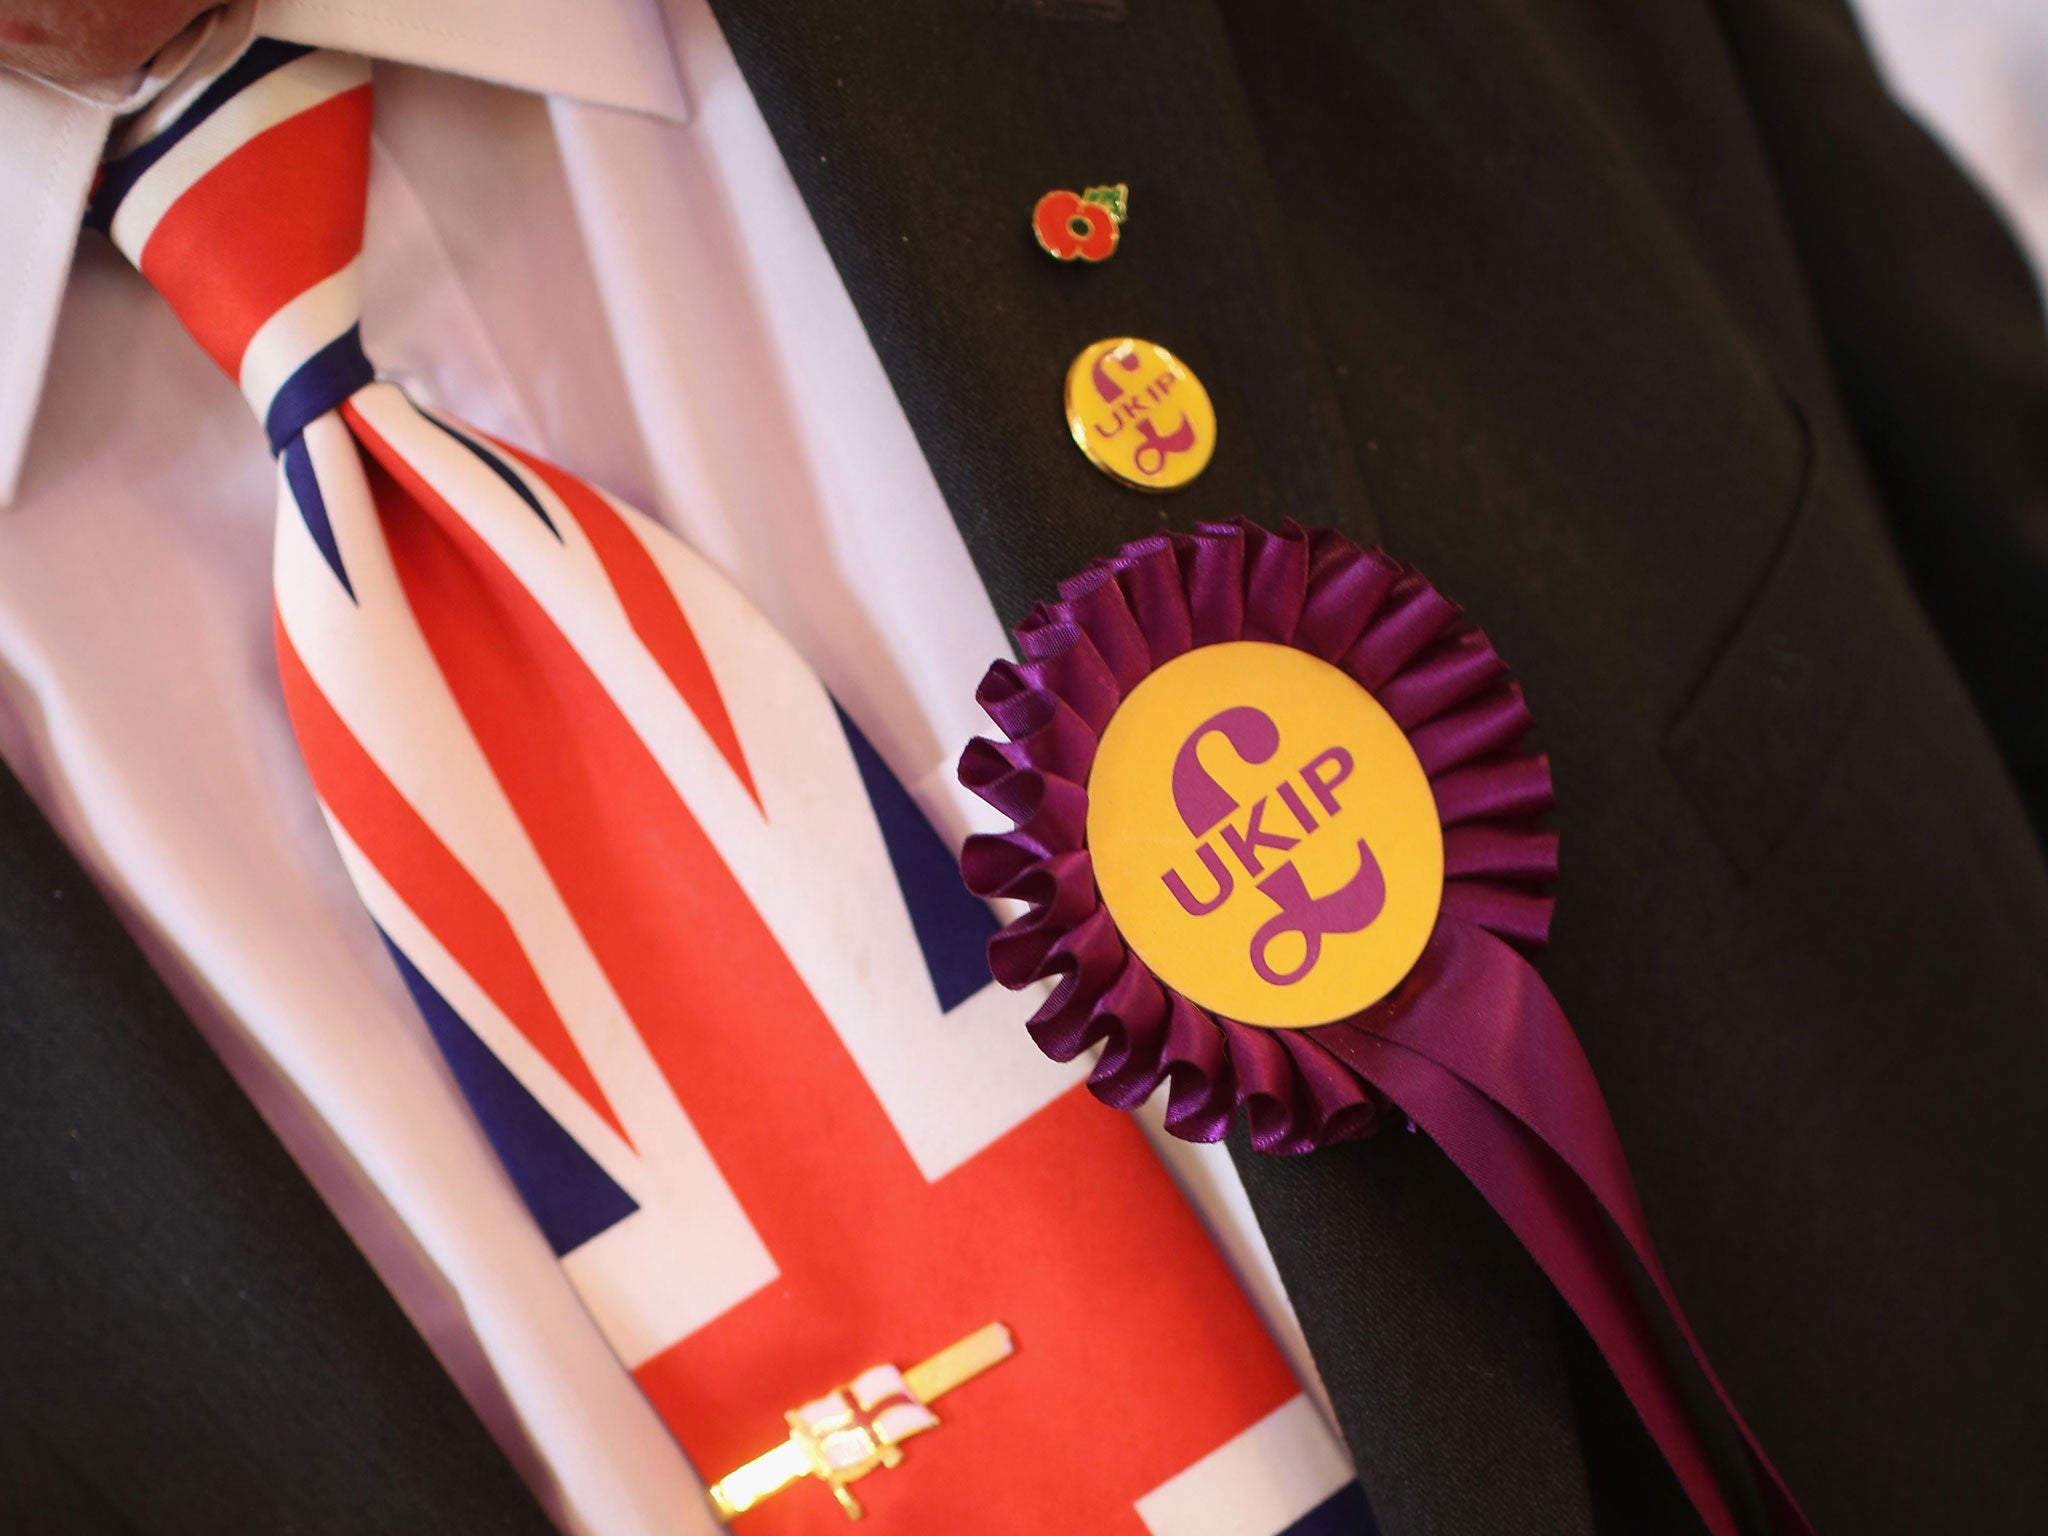 A delegate sporting a Union Flag tie attends the UKIP annual party conference at Central Hall, Westminster in September 2013. The party has since suspended a former chairman for 100 years after he complained about a fellow member to a newspaper.